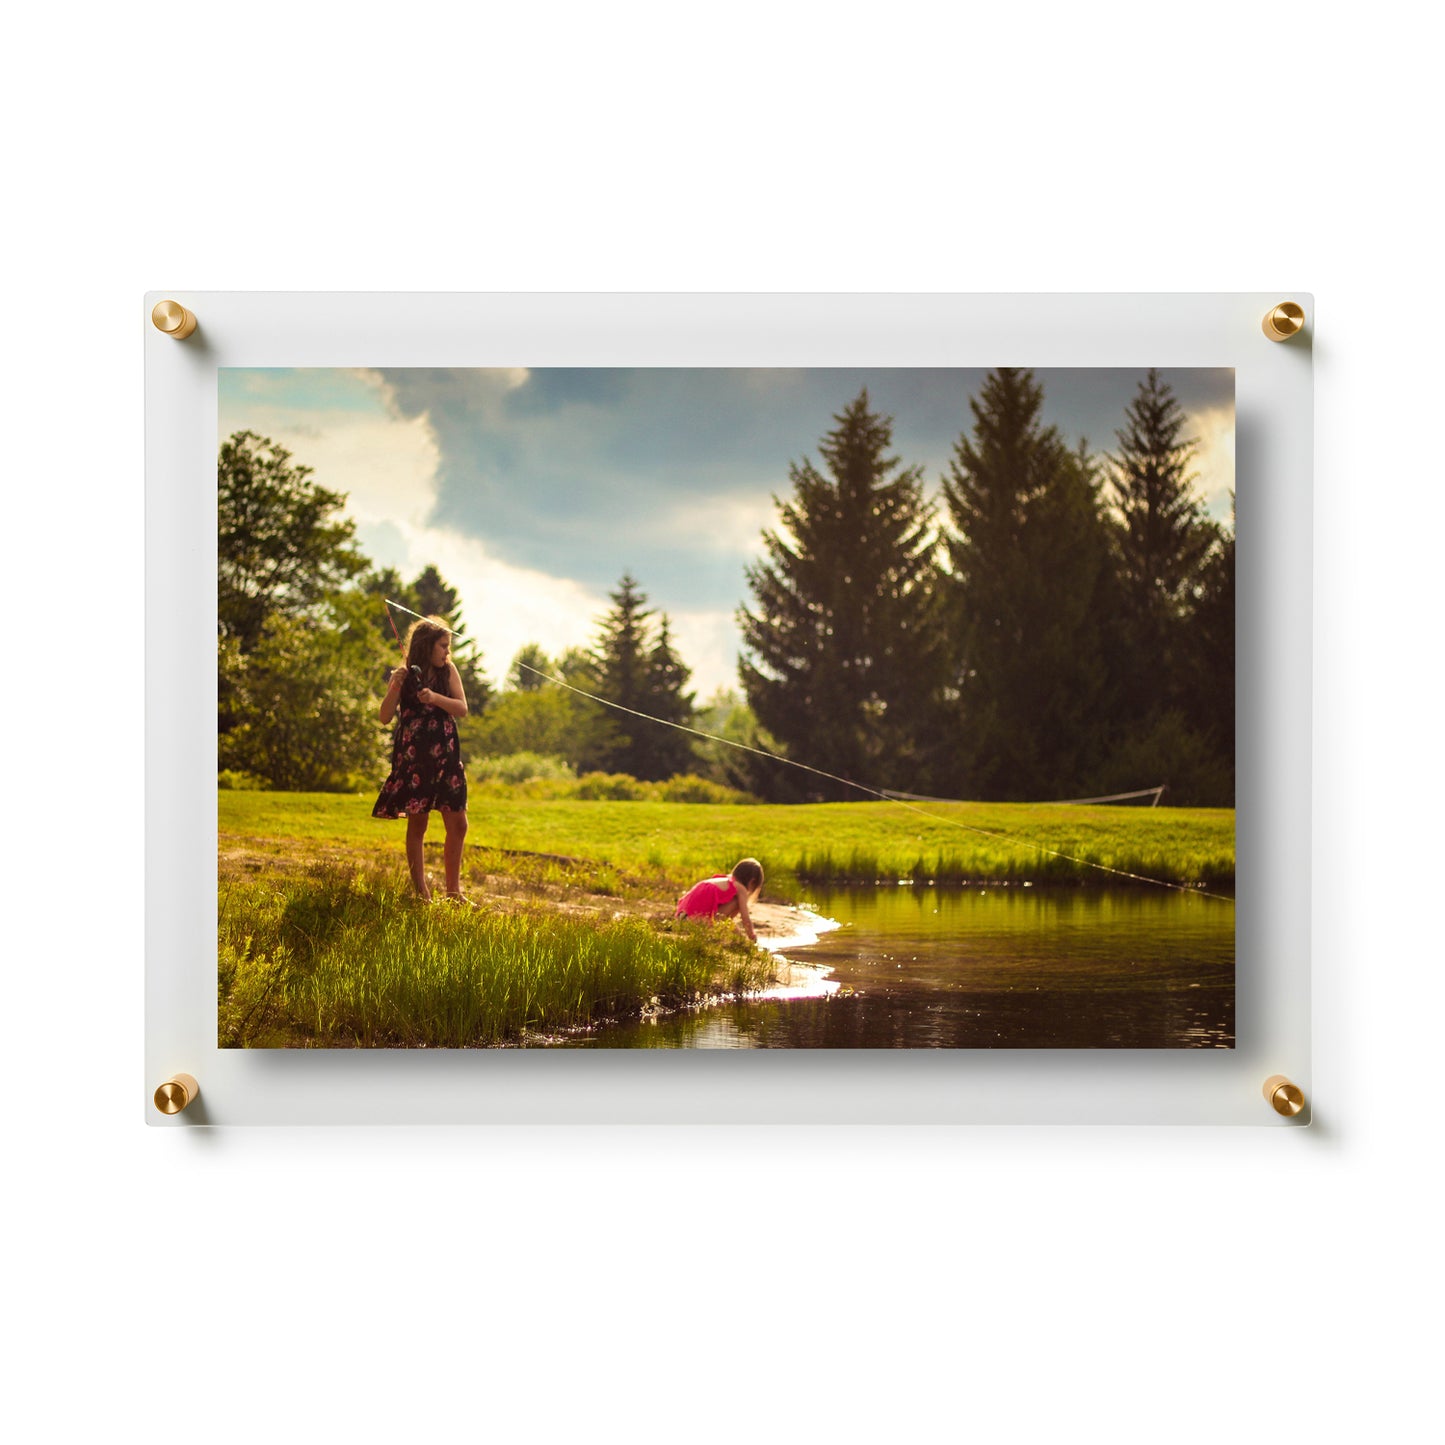 Double Panel Acrylic Floating Wall Frames - CHOOSE YOUR SIZE (Silver/Gold)